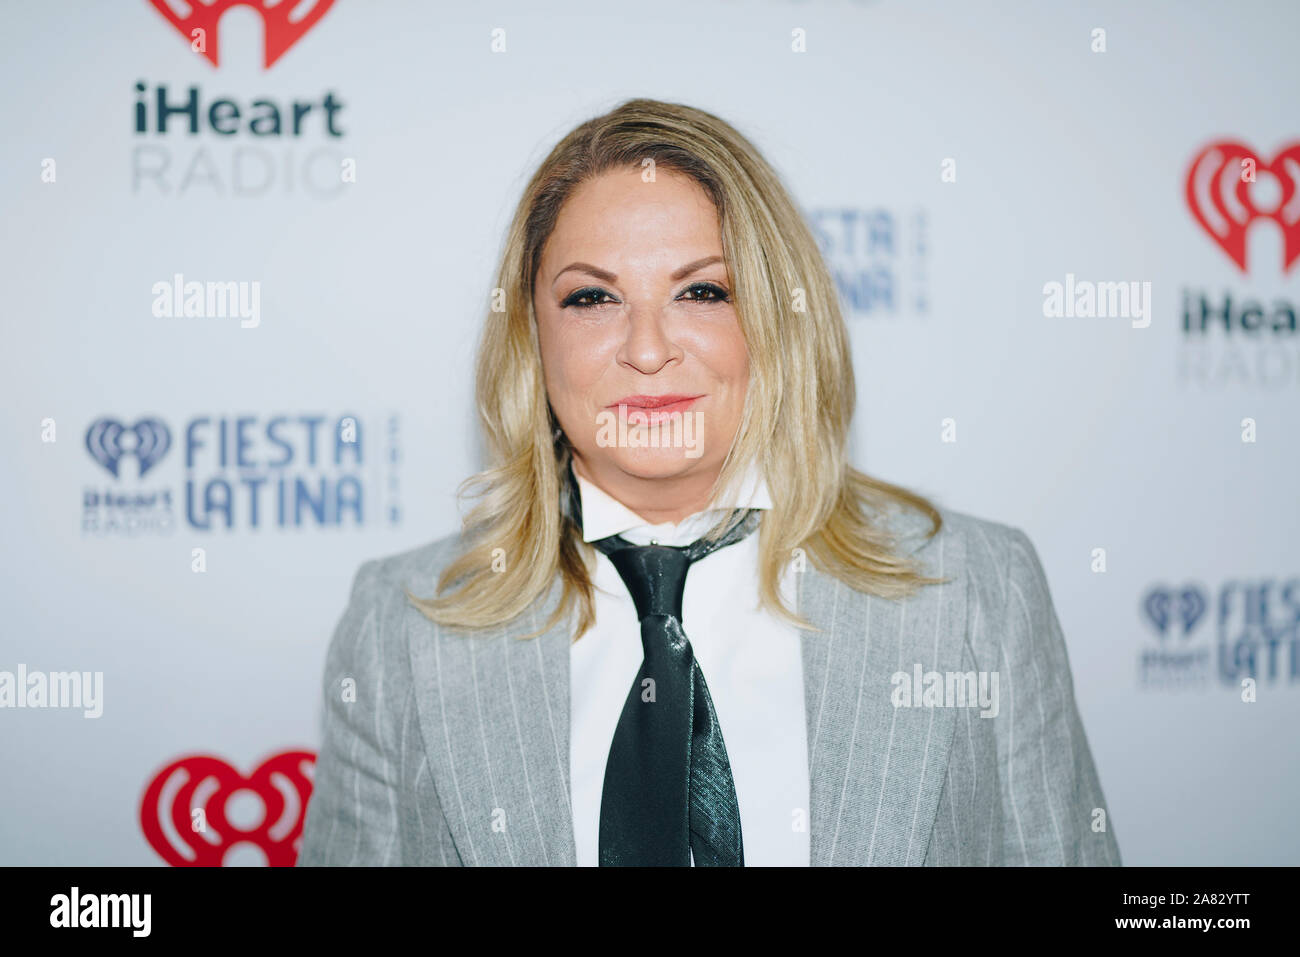 Ana Maria Polo on the red carpet at the iHeartRadio Fiesta Latina 2019 at  the AmericanAirlines Arena in Miami, Florida on November 2 2019 Stock Photo  - Alamy